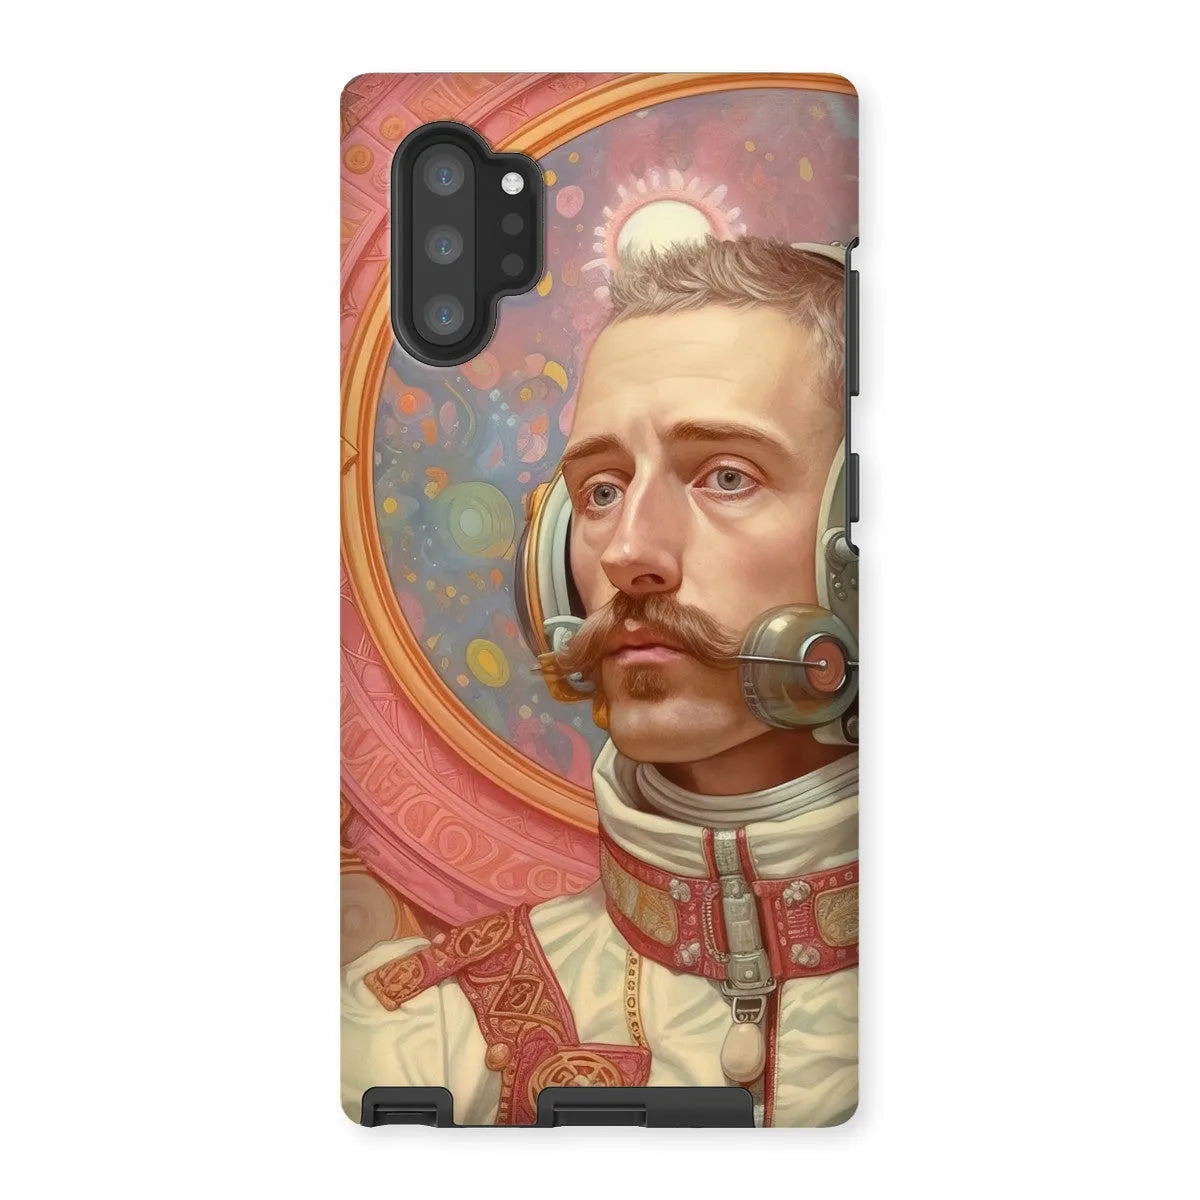 Axel - Gay German Astronaut Aesthetic Art Phone Case - Samsung Galaxy Note 10p / Matte - Mobile Phone Cases - Aesthetic